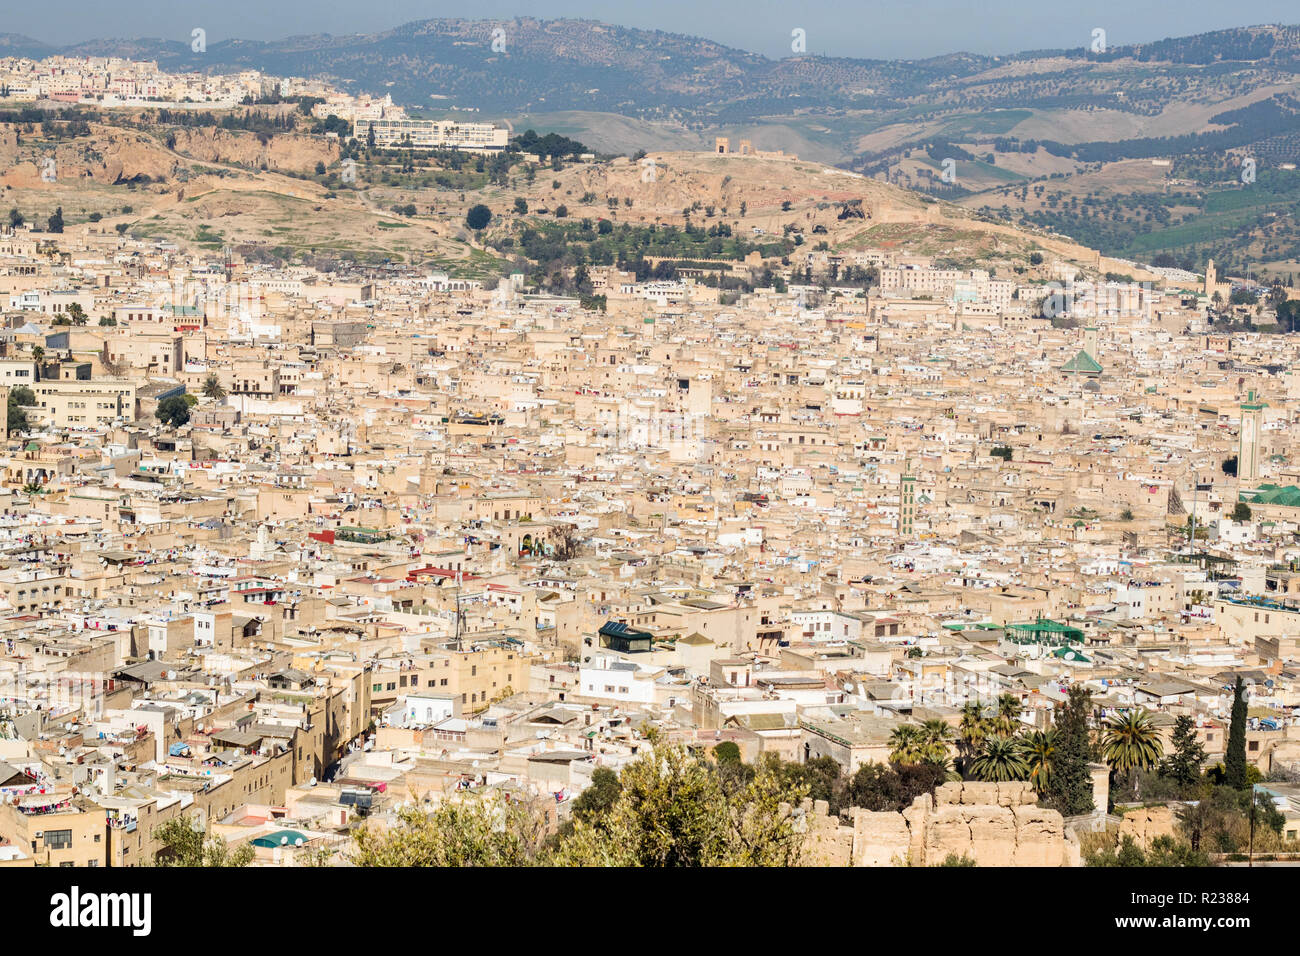 View of the old town Fes, Morocco. North Africa, Africa Stock Photo